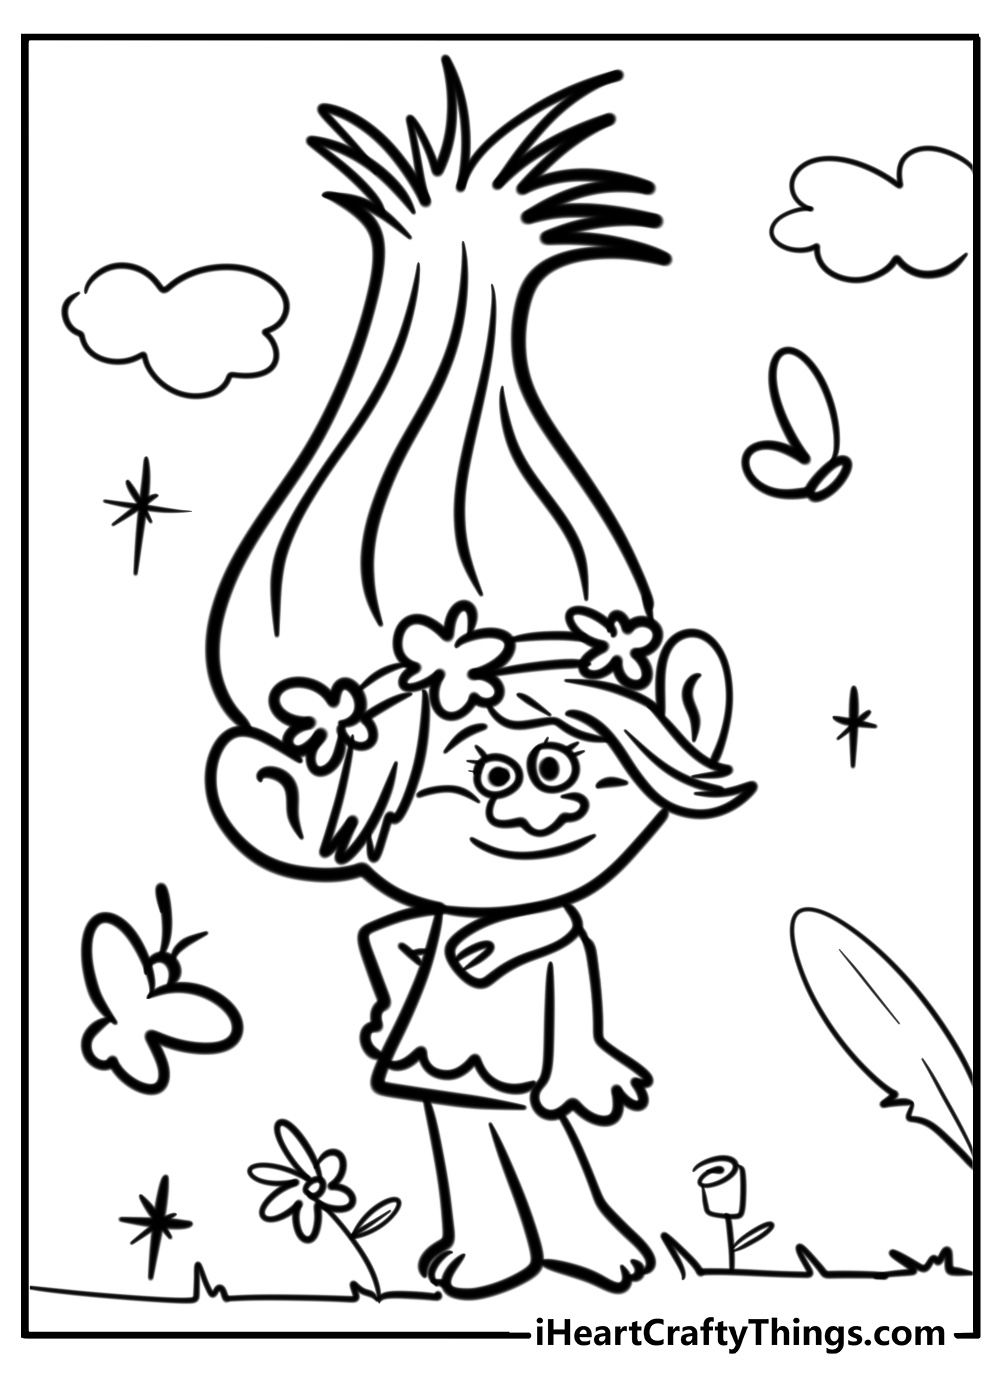 Princess Poppy standing in field coloring sheet